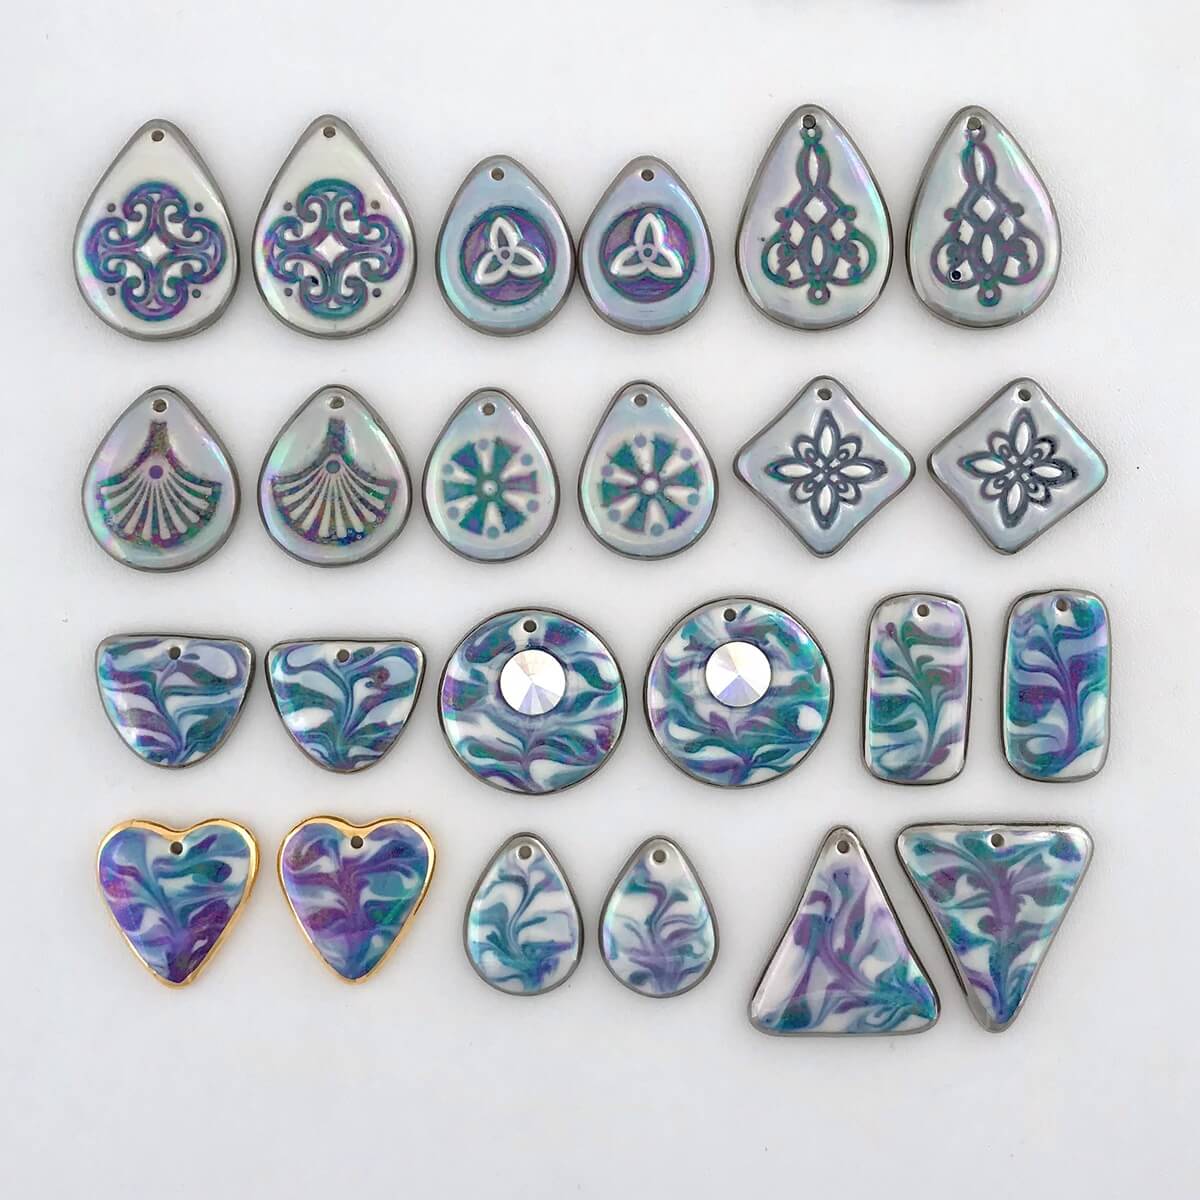 Earring components in shades of blue. The iridescent overglaze creates flashes of green & purple on the surface.